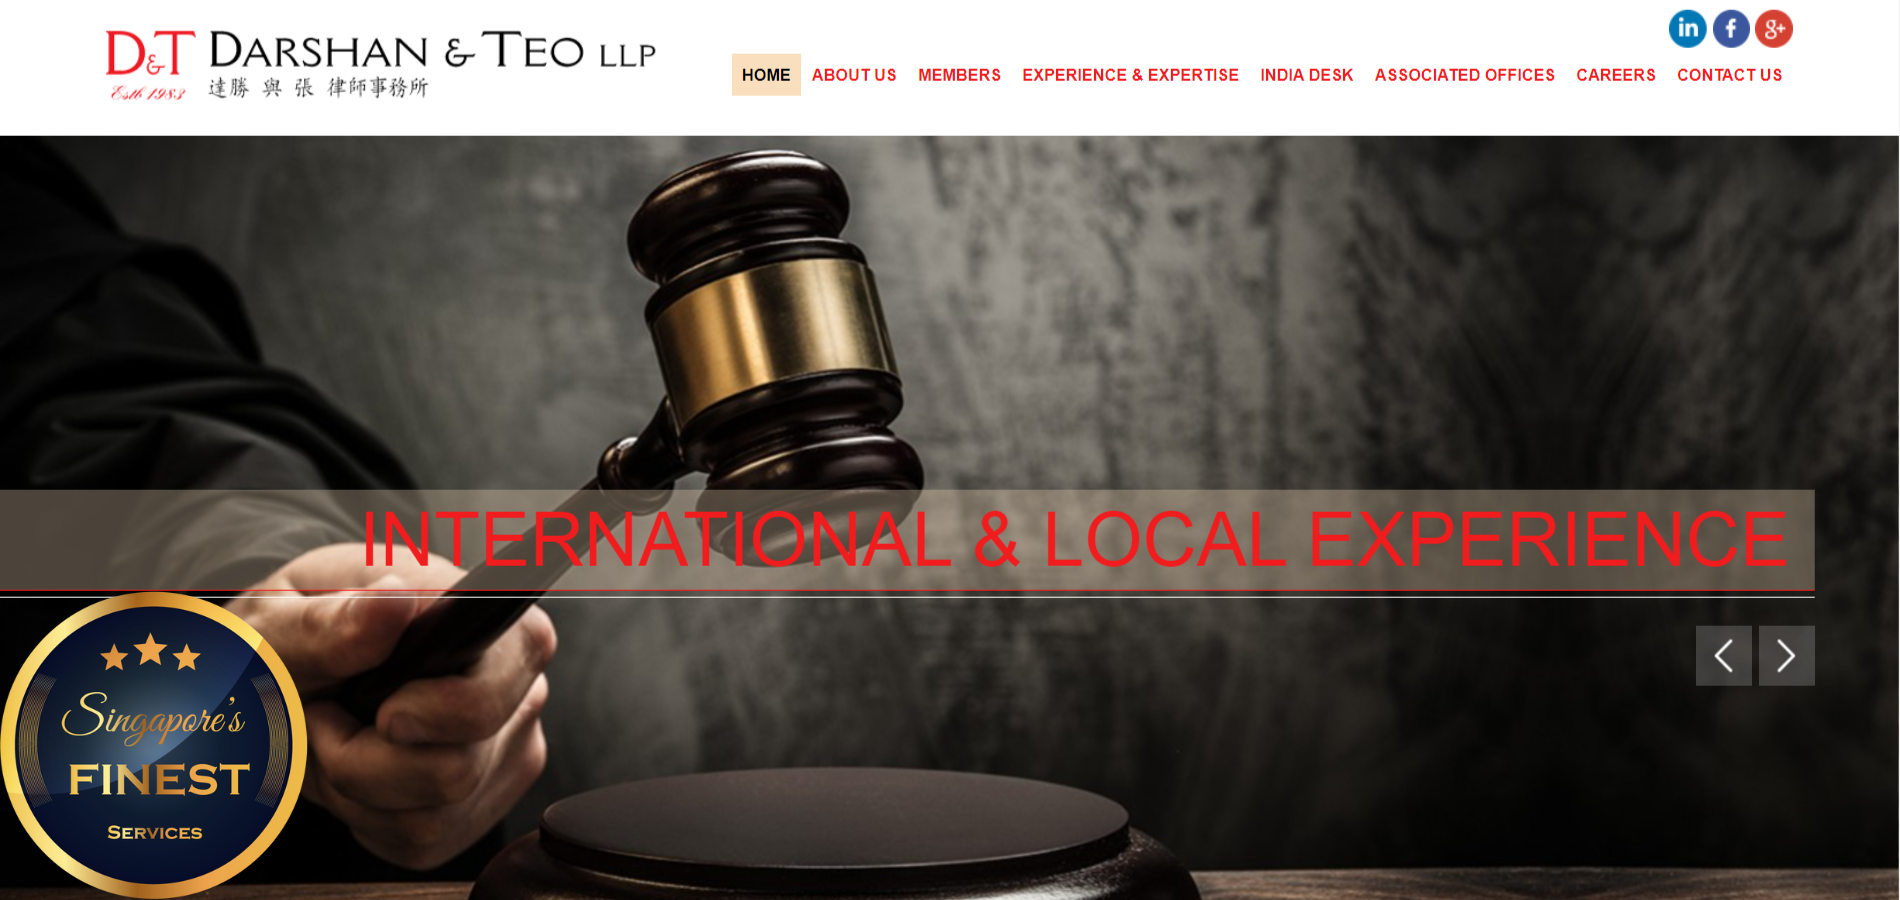 The Finest Bankruptcy Lawyers in Singapore